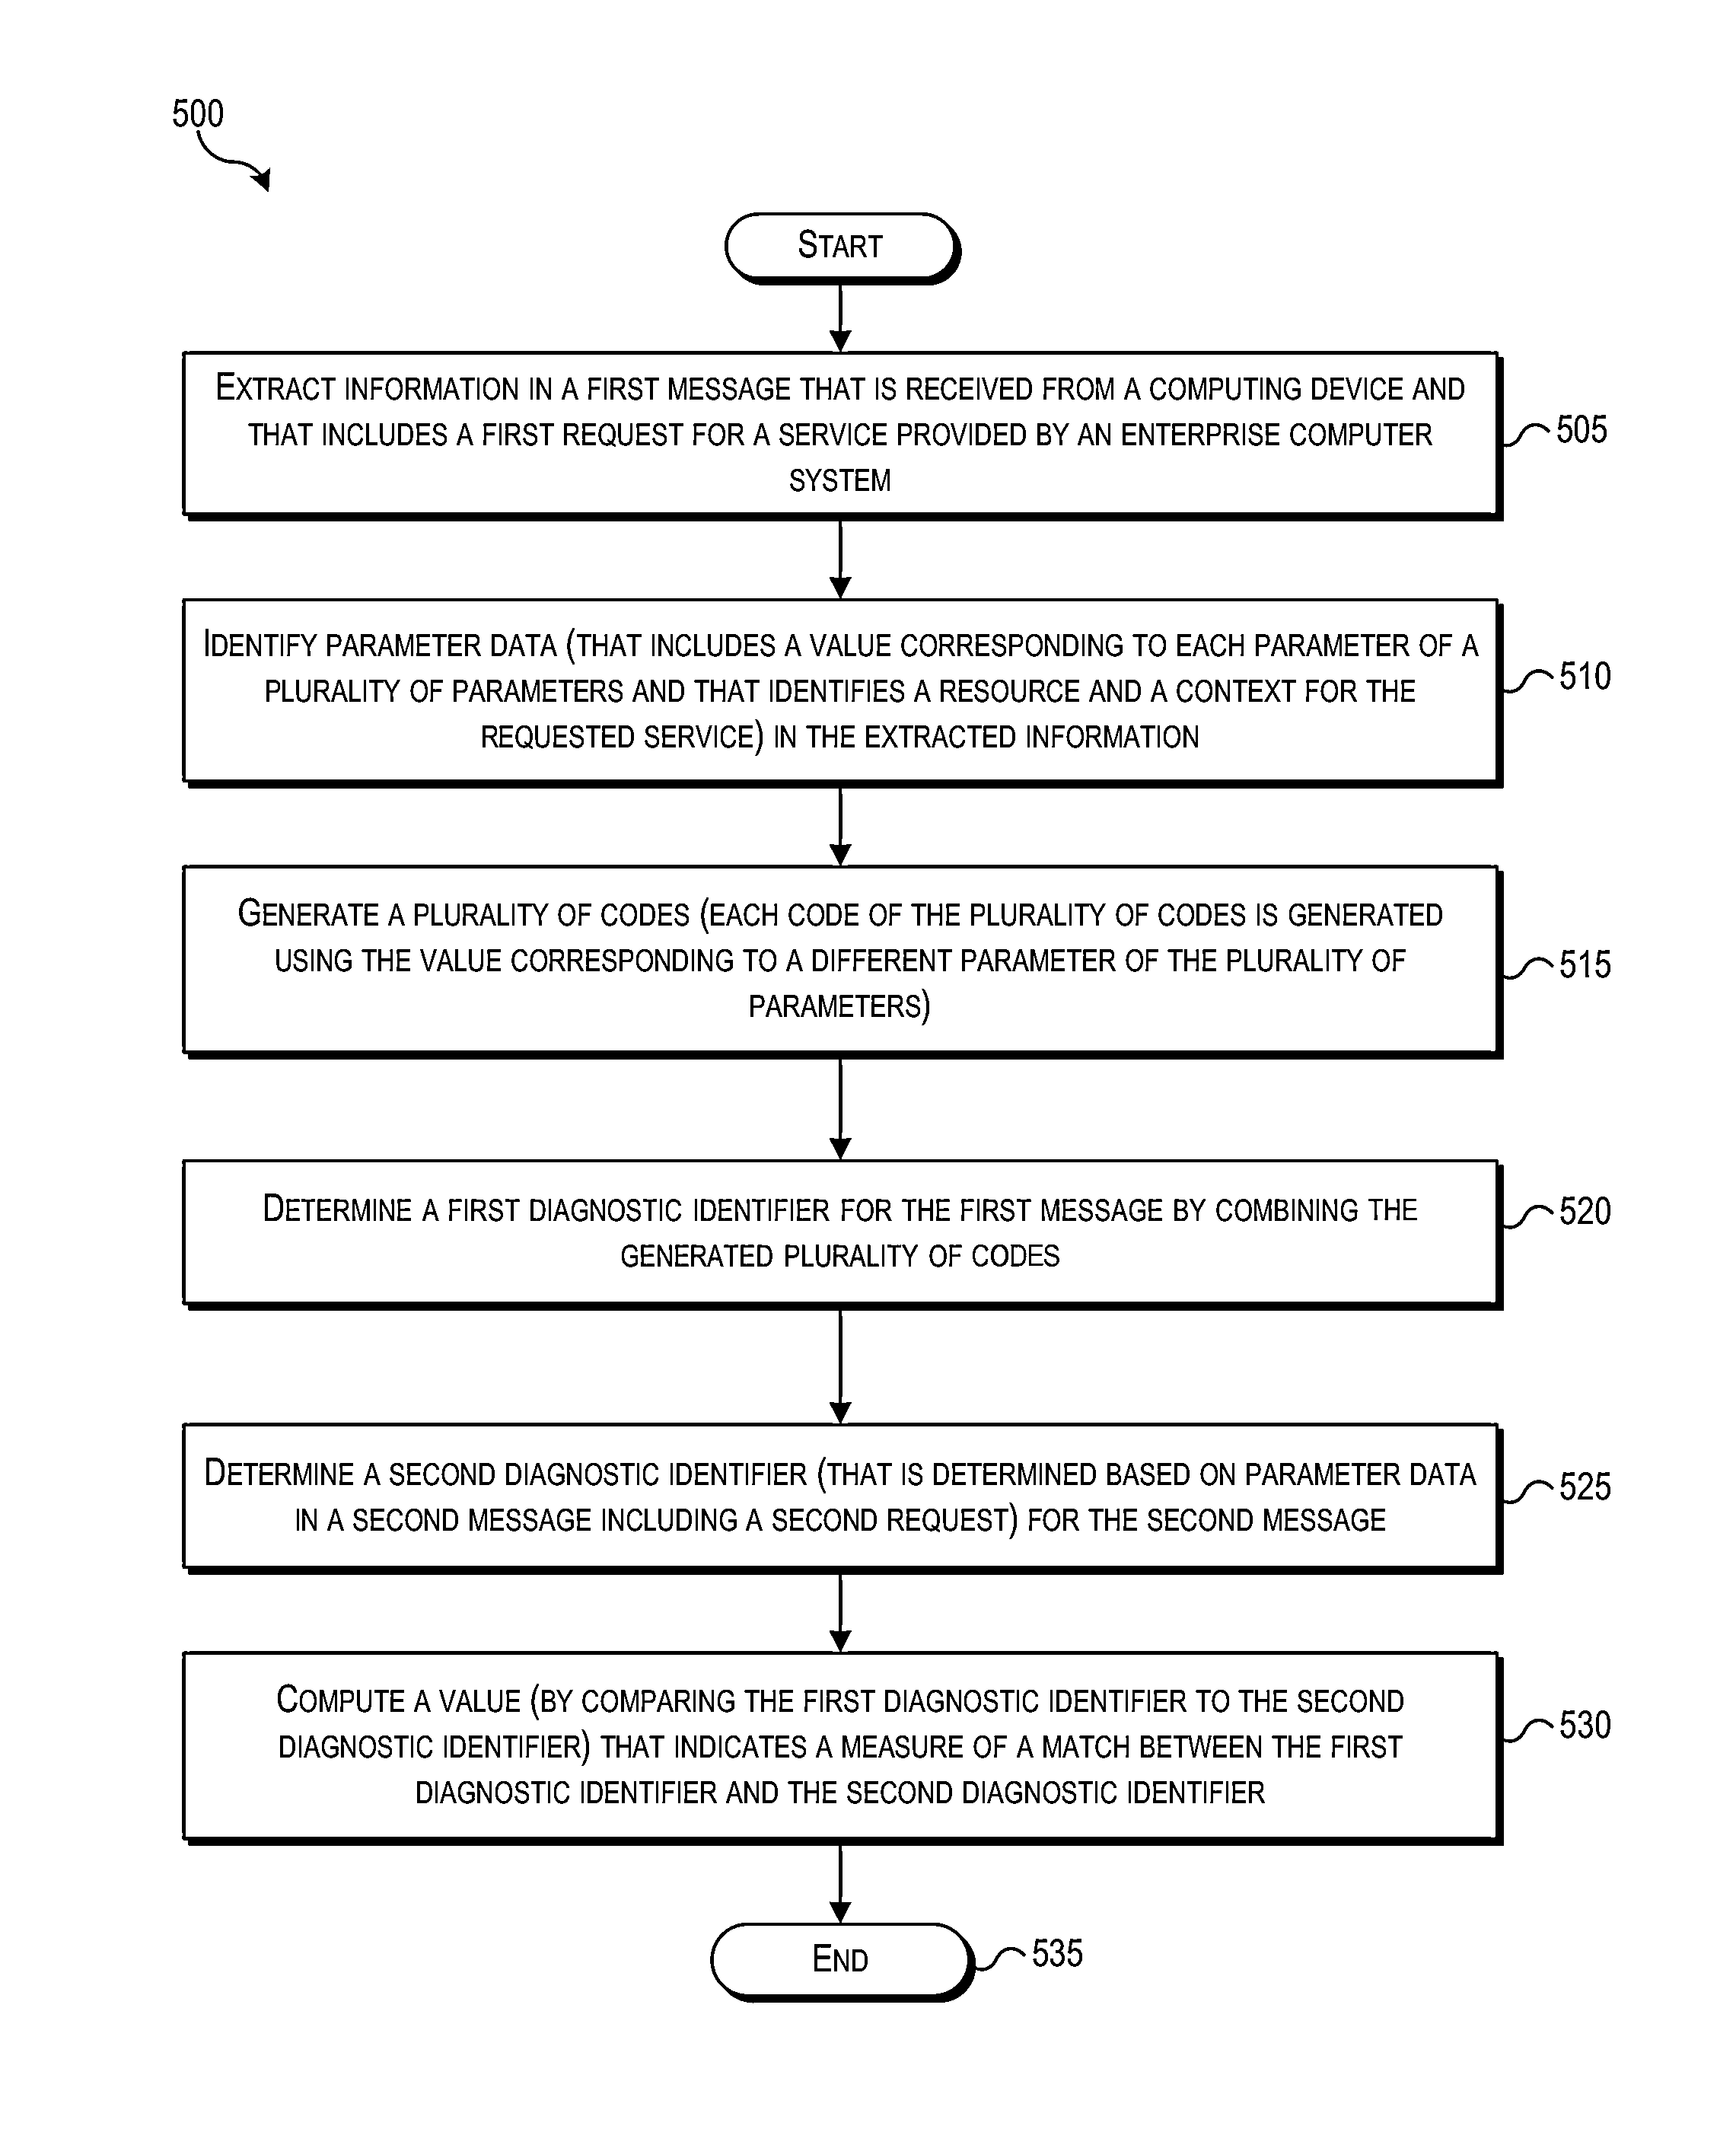 Techniques for generating diagnostic identifiers to trace request messages and identifying related diagnostic information